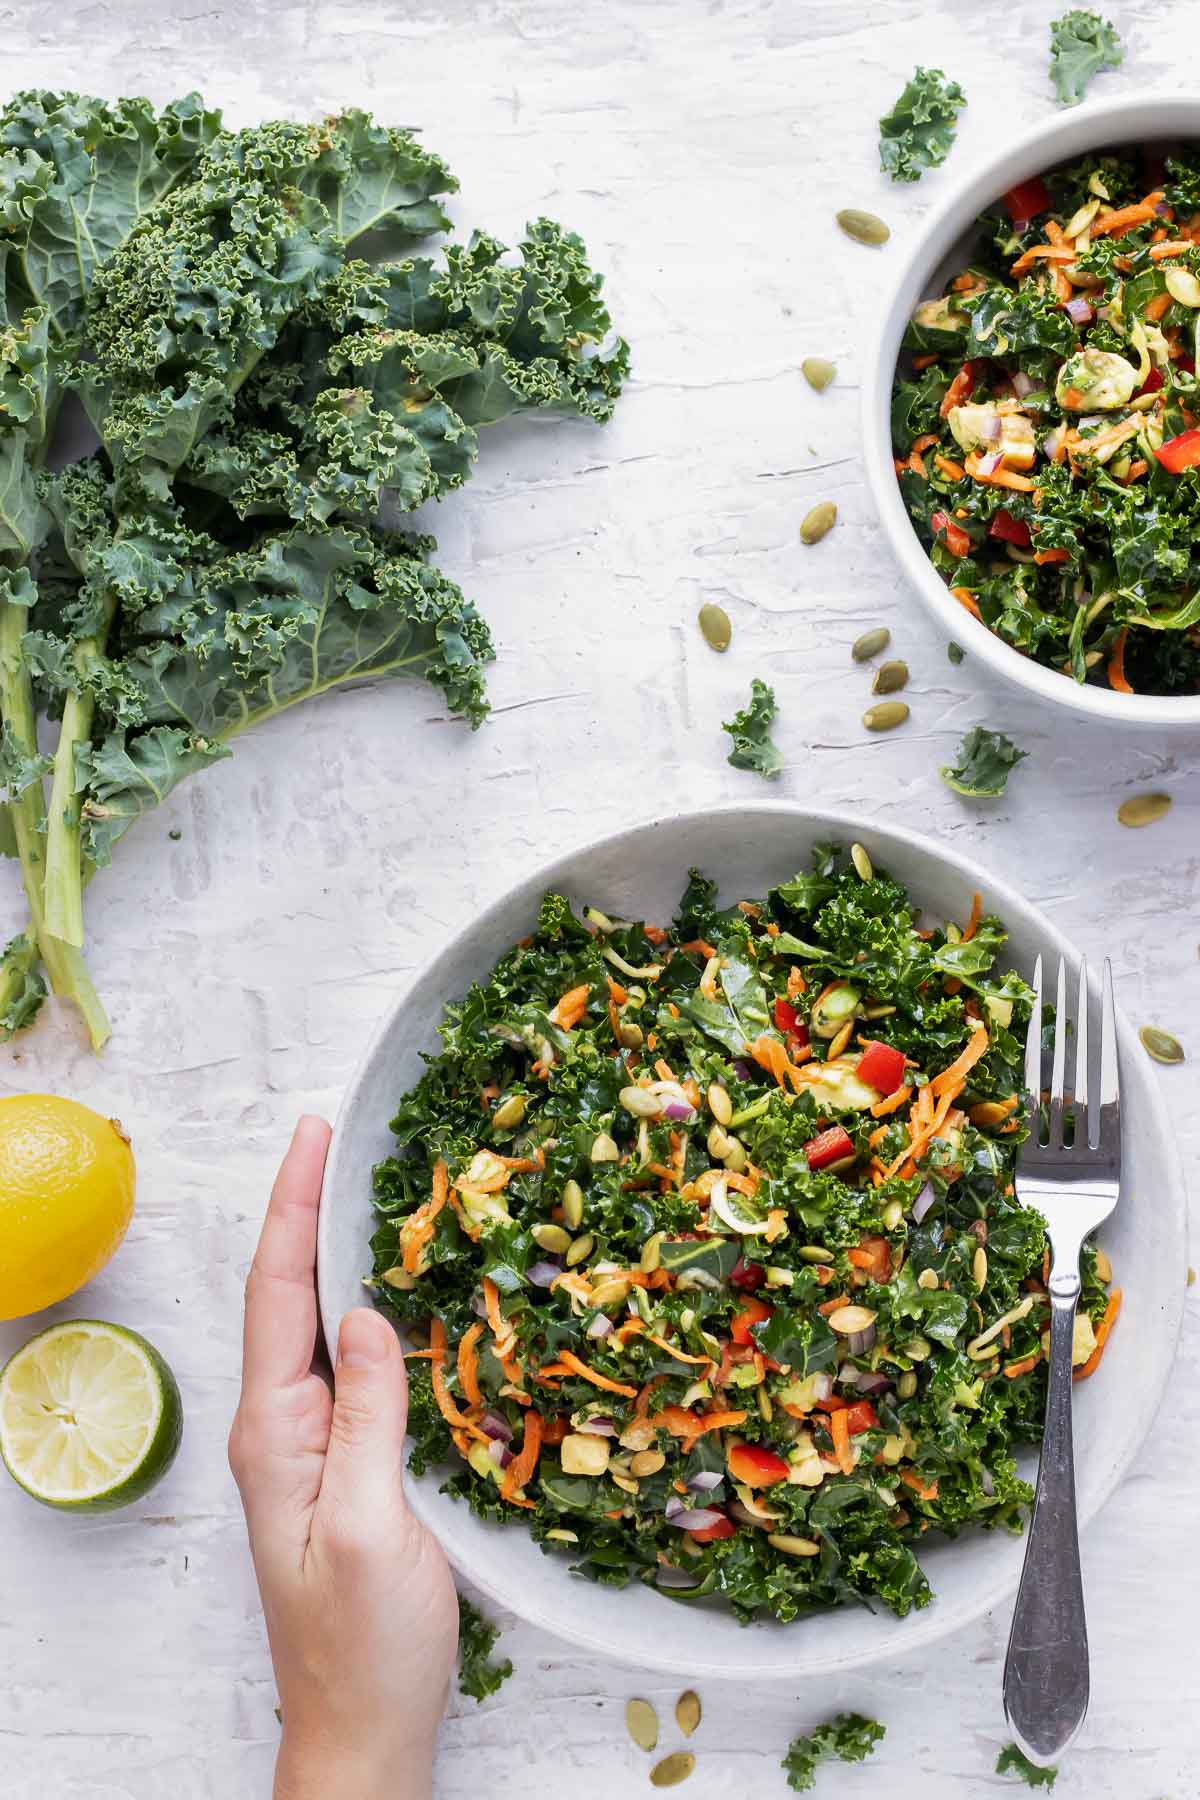 Two salad bowls full of a healthy kale salad recipe with avocado and lemon dressing.